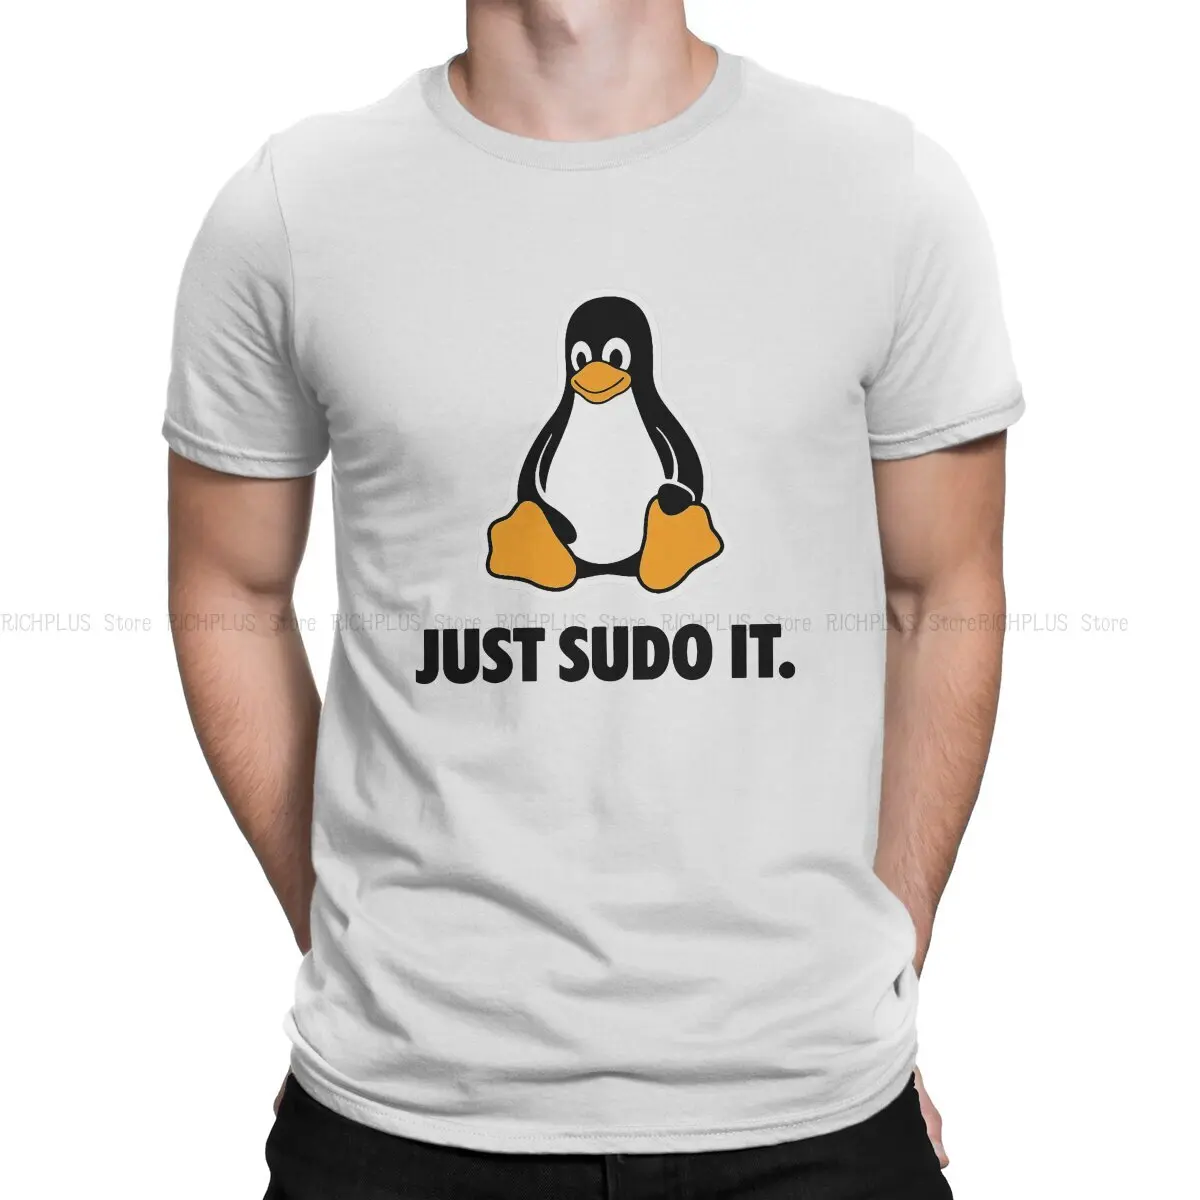 

Just Sudo It Black Unique TShirt Linux Operating System Leisure Polyester T Shirt Hot Sale T-shirt For Adult